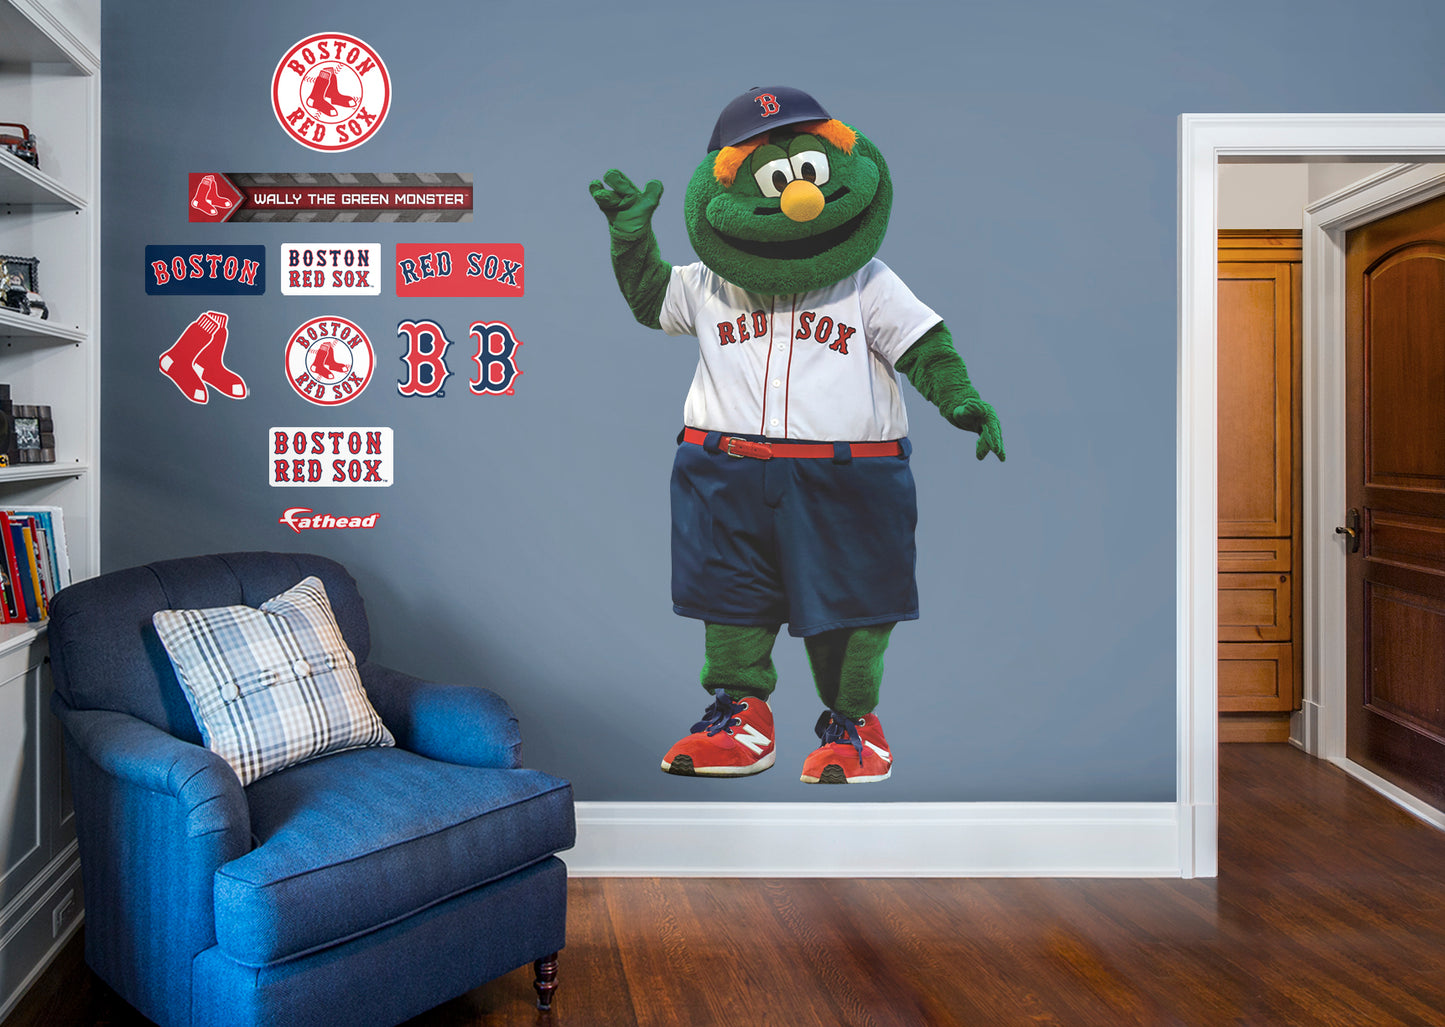 Wally the Green Monster - Boston Red Sox Mascot Guide